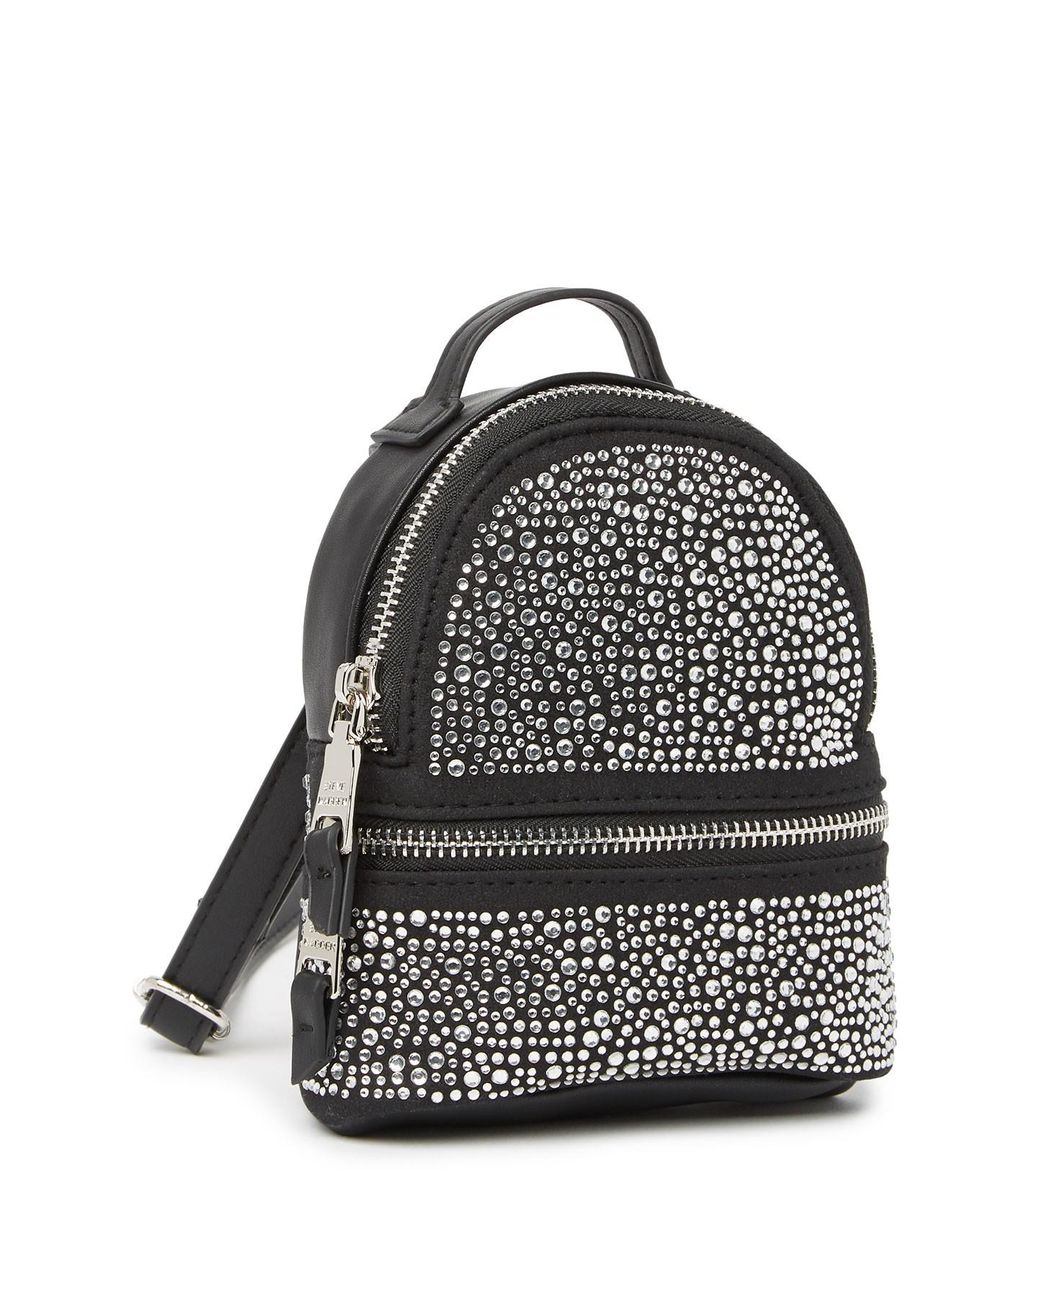 Madden NYC Women's Mini Quilted Zip Backpack Black 